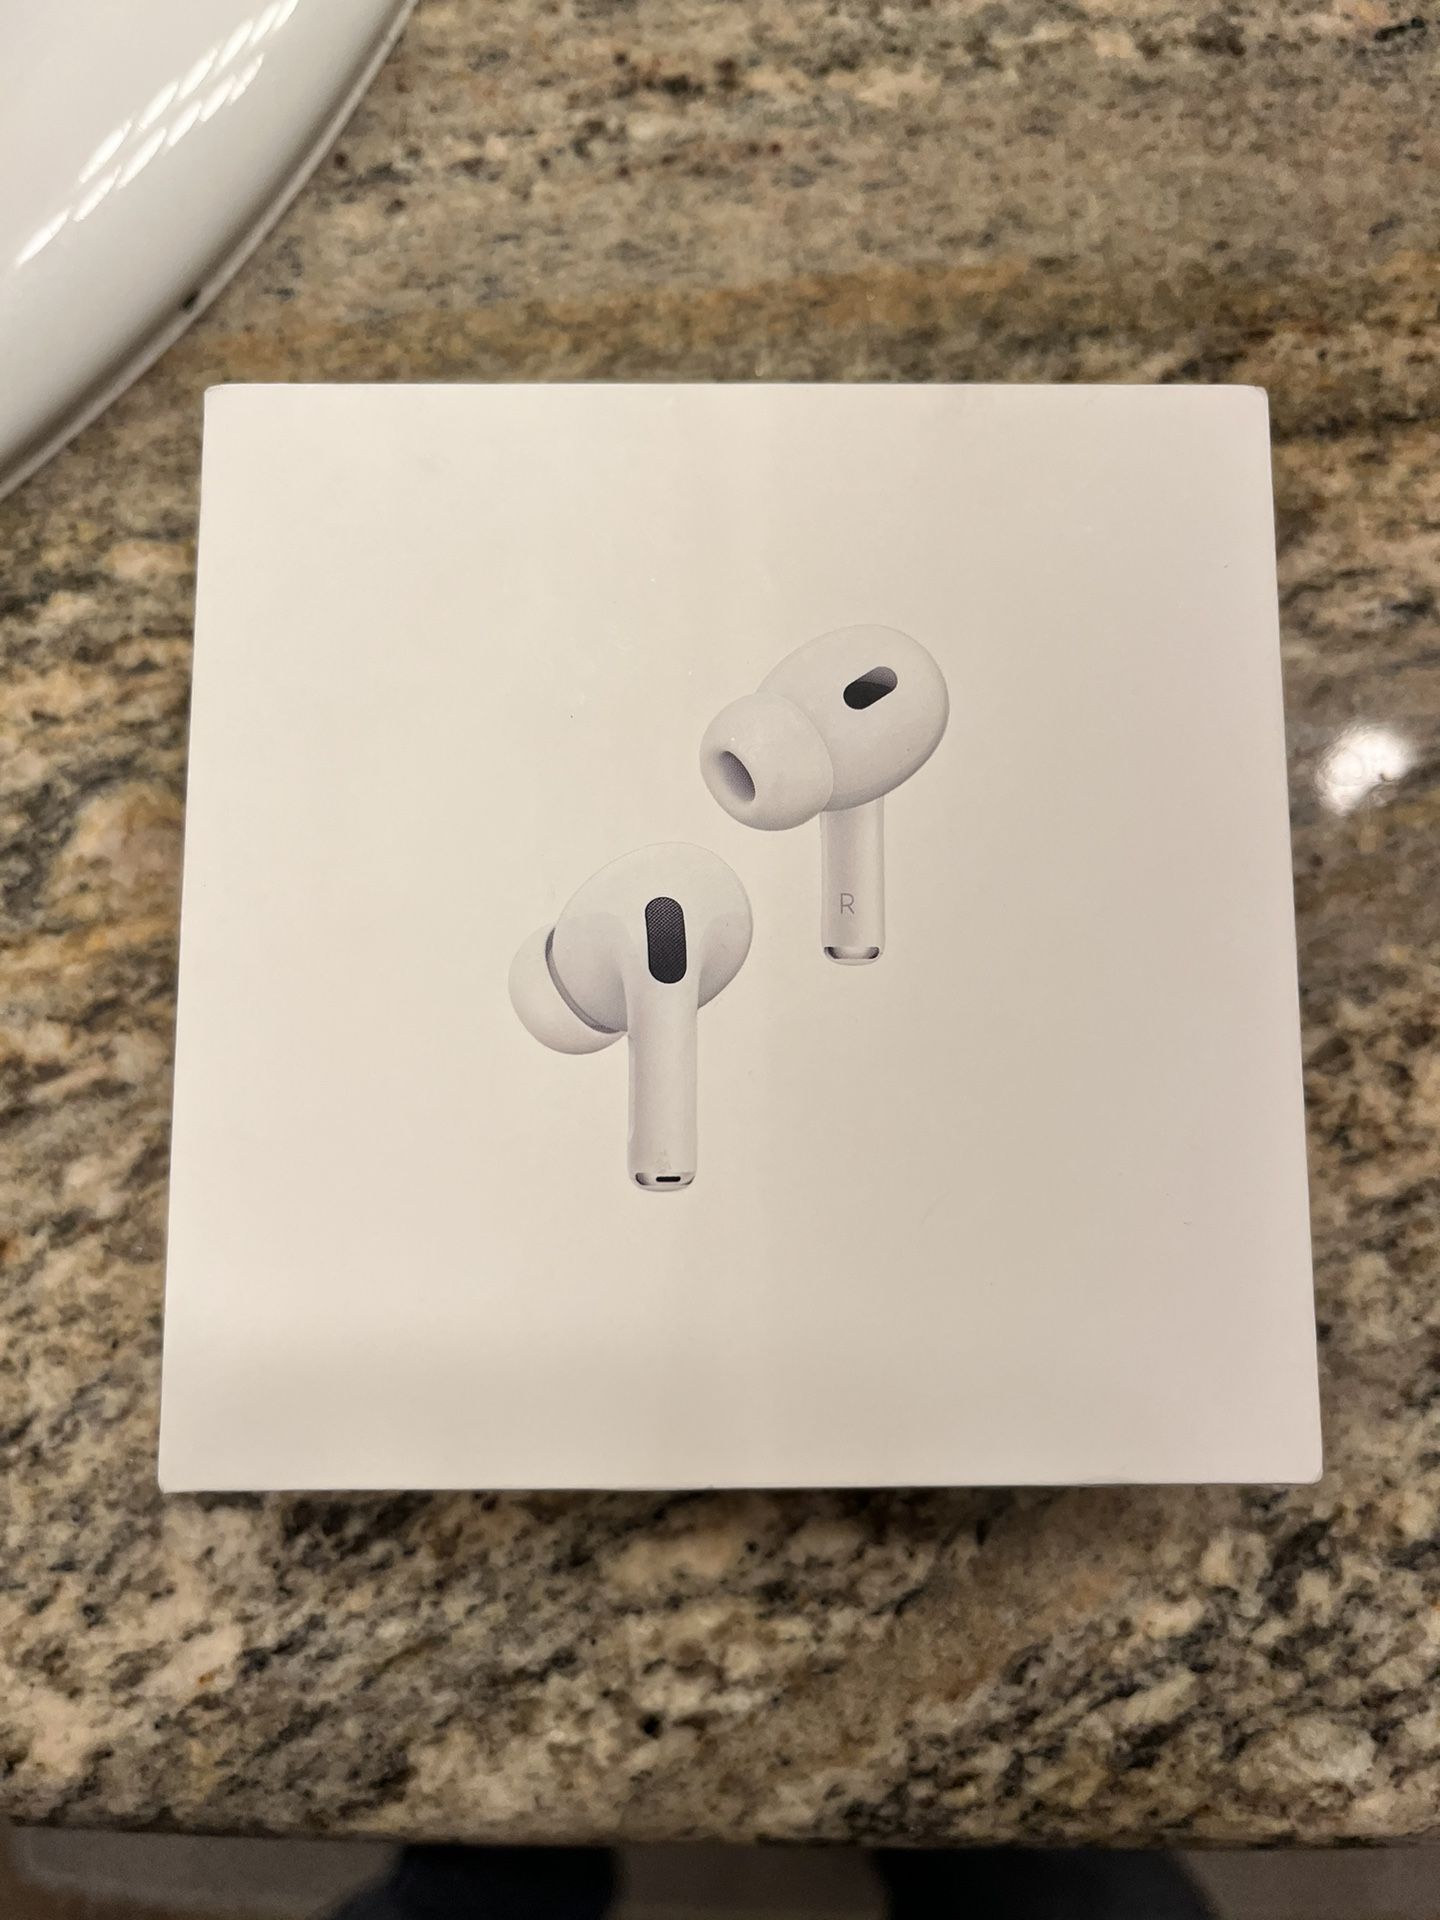 Air Pods Pro (2nd Generation) $230